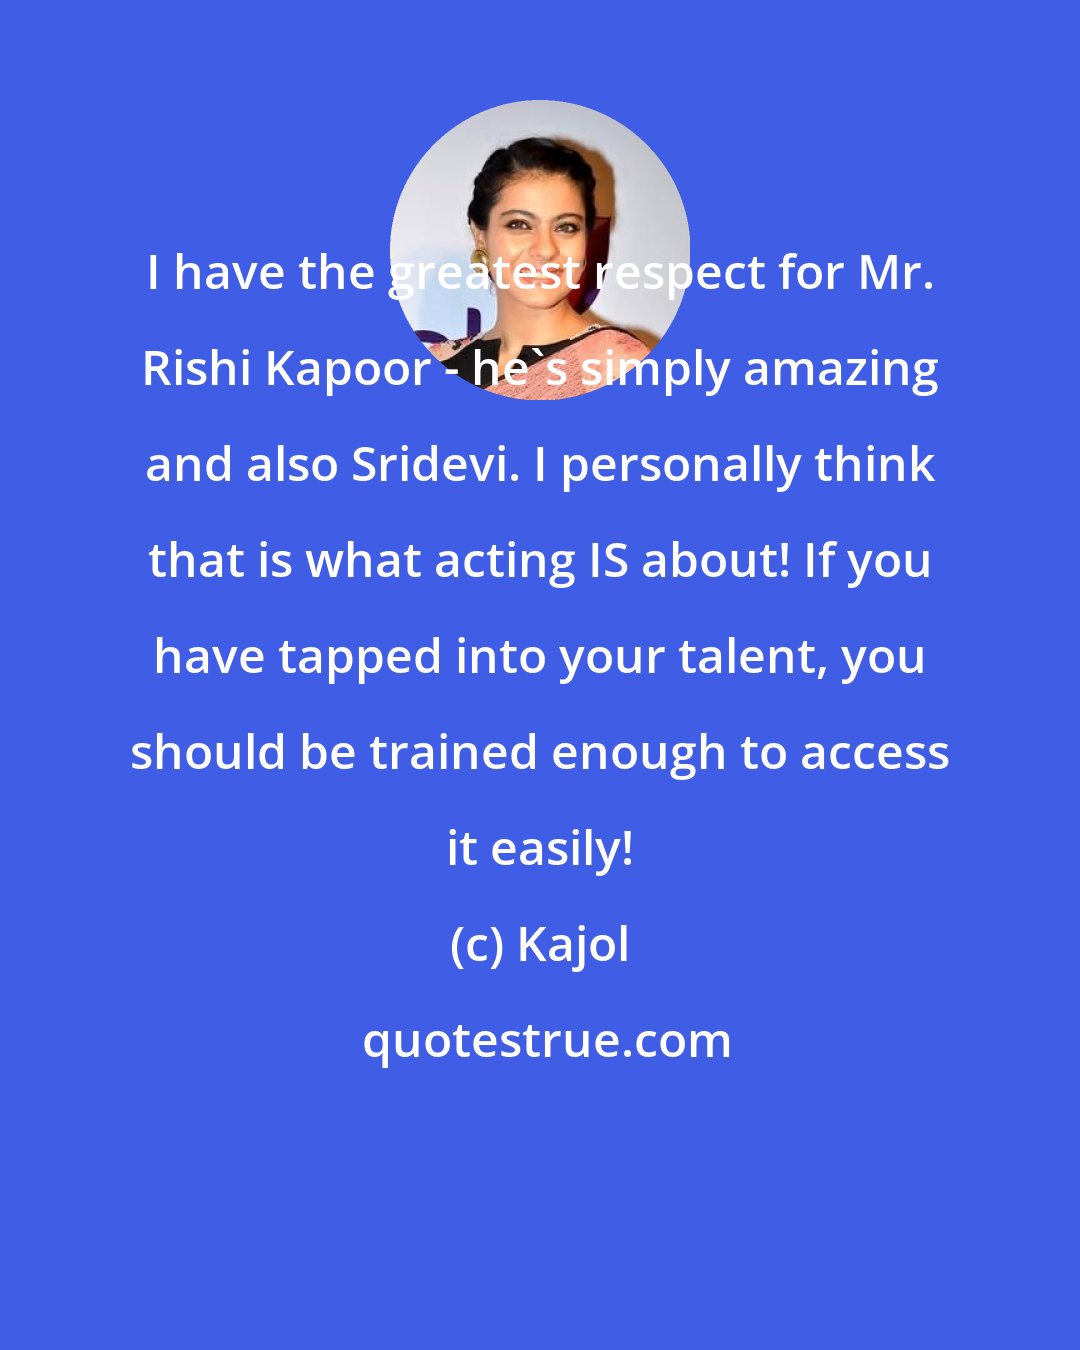 Kajol: I have the greatest respect for Mr. Rishi Kapoor - he's simply amazing and also Sridevi. I personally think that is what acting IS about! If you have tapped into your talent, you should be trained enough to access it easily!